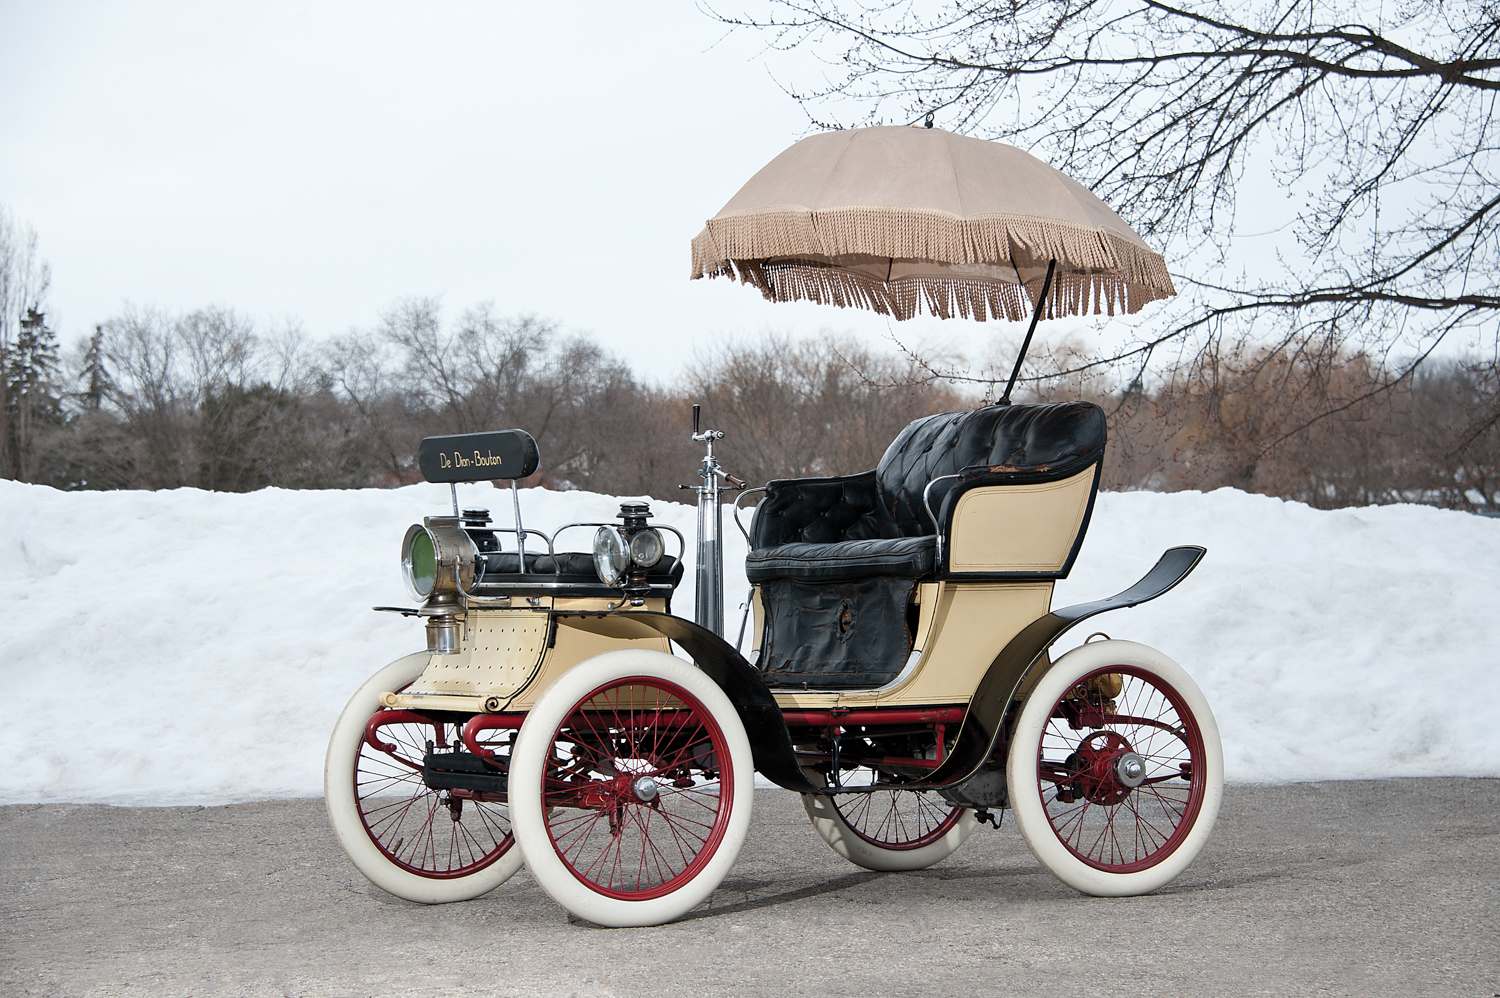 1901 De Dion-Bouton New York Type Motorette, Photo: RM Sotheby's Aaron Summerfield ©2014 Courtesy of RM Auctions